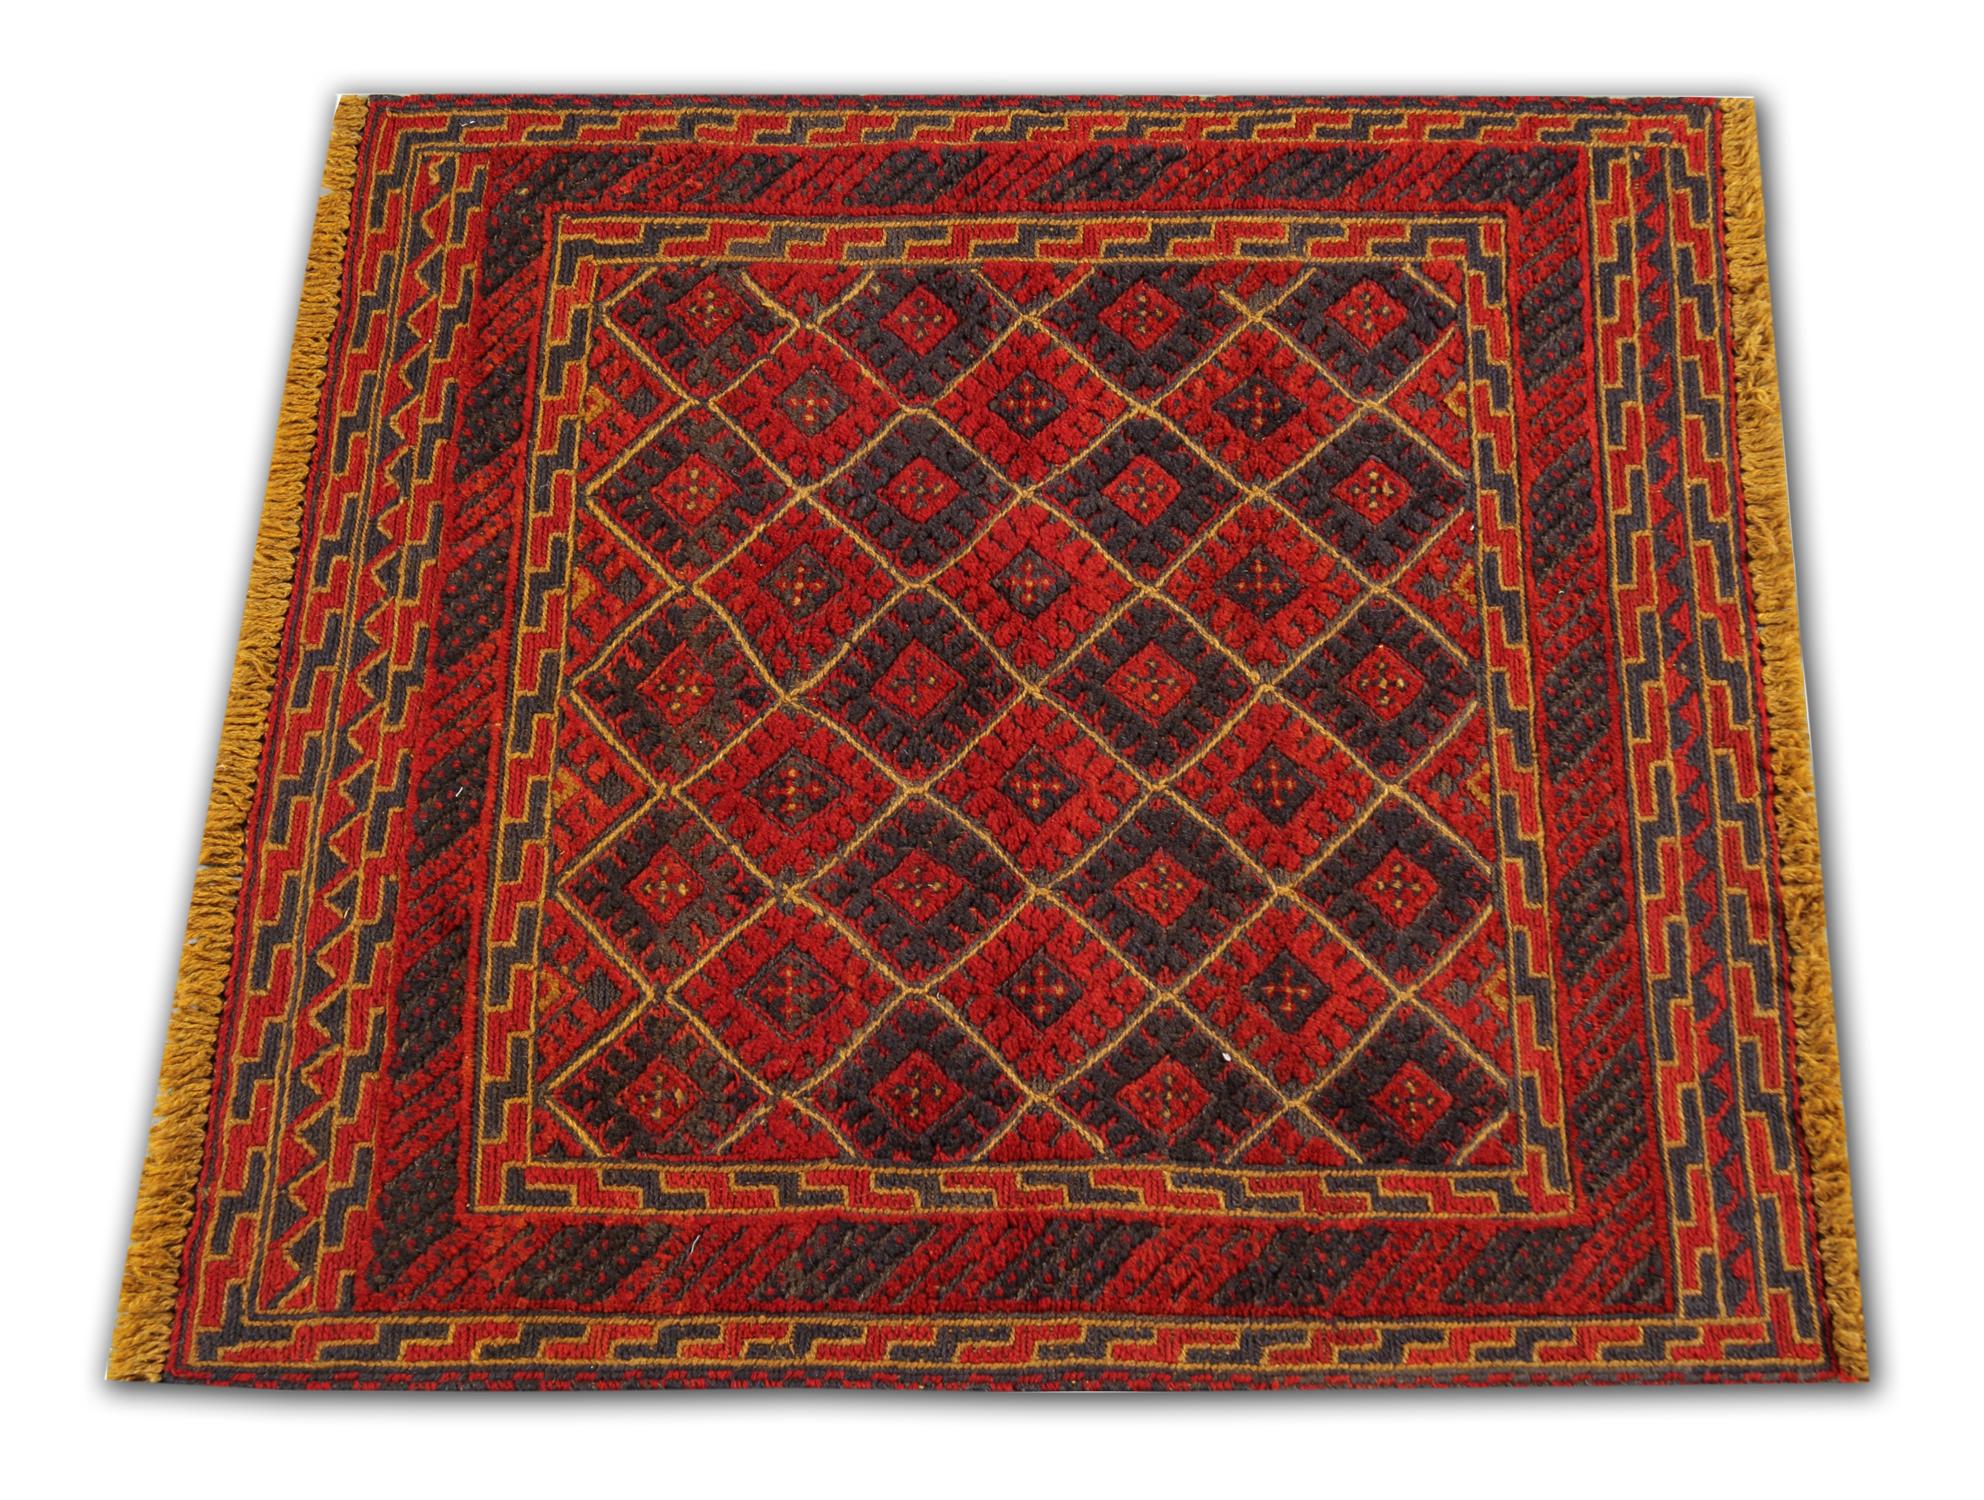 This is an example of a fine Afghan rug made by highly skilled Turkman weavers in the north of Afghanistan, known for their fine handmade rugs. They have used hand-spun wool and 100% organic dyes for the production of these wool rugs. This tribal